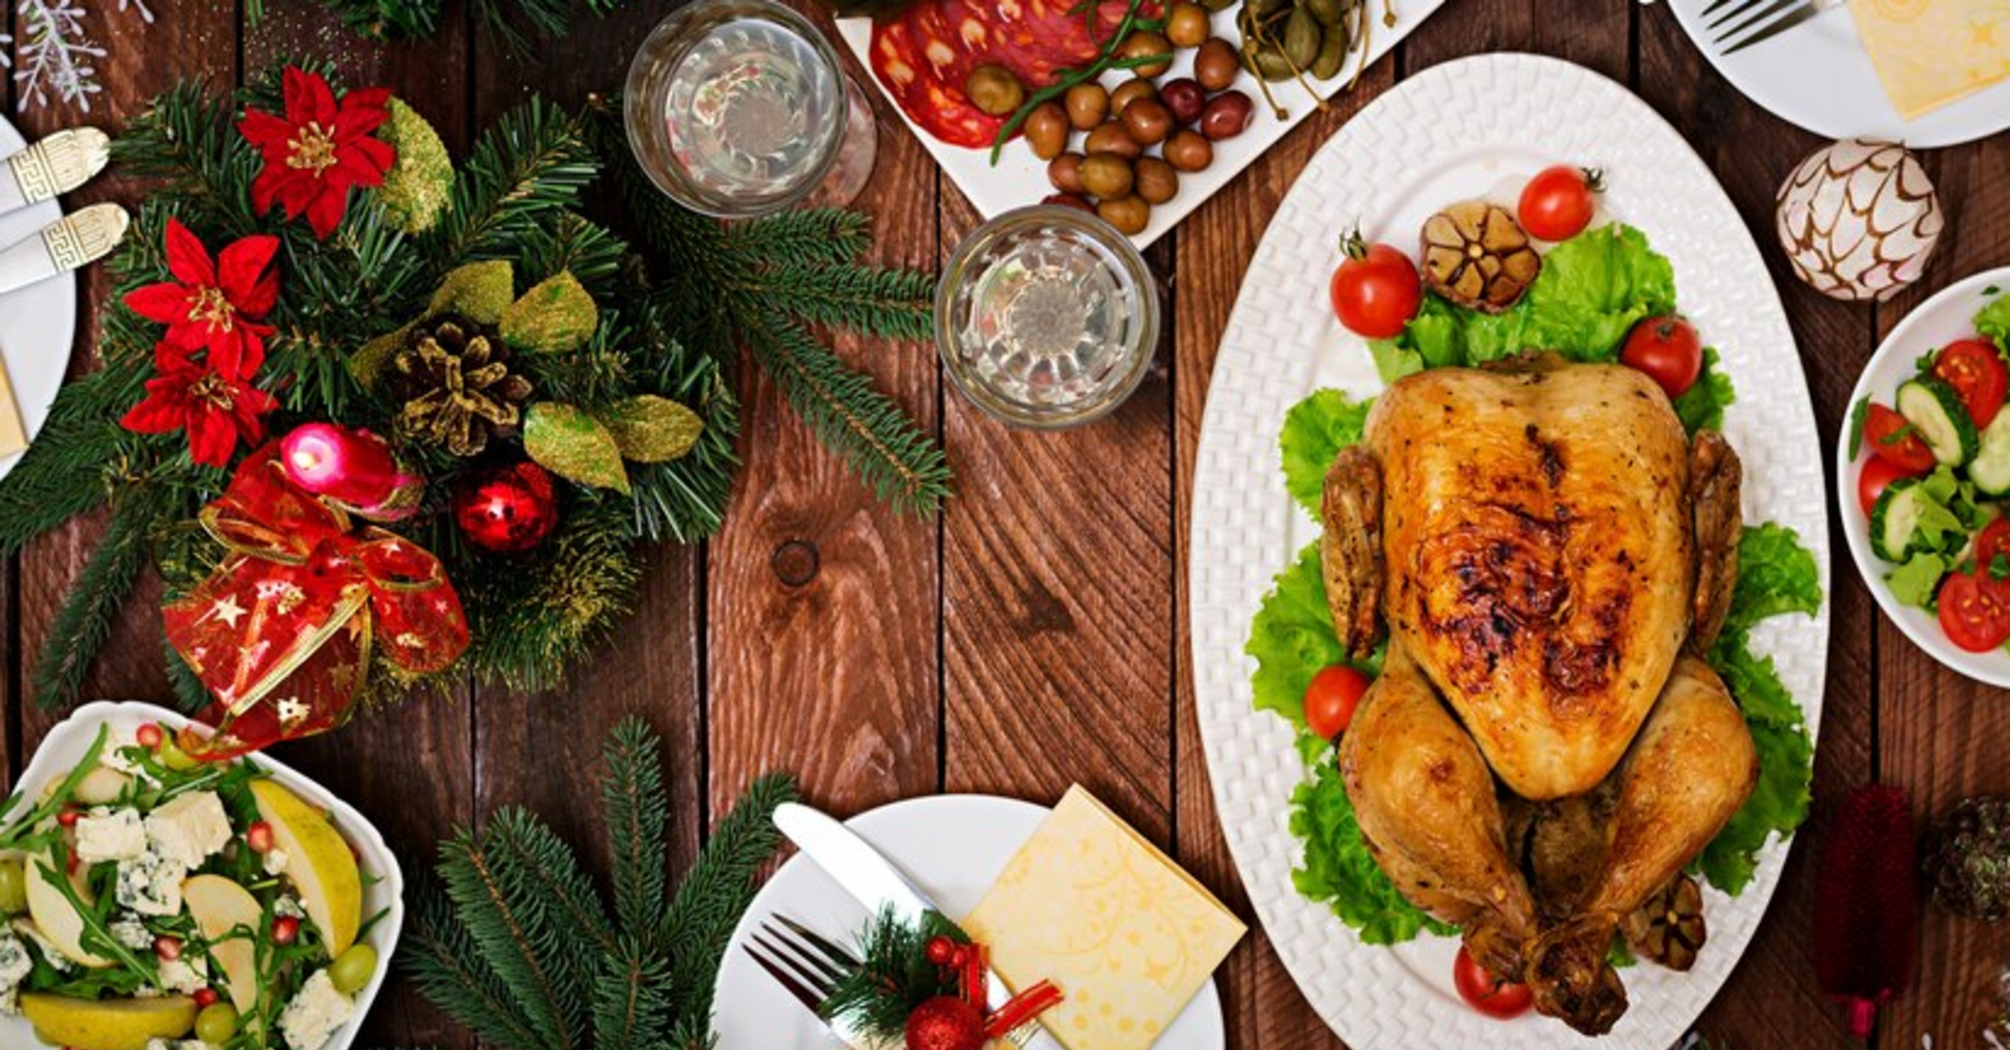 Crabs, noodles or turkey: Top 10 Christmas dishes from around the world